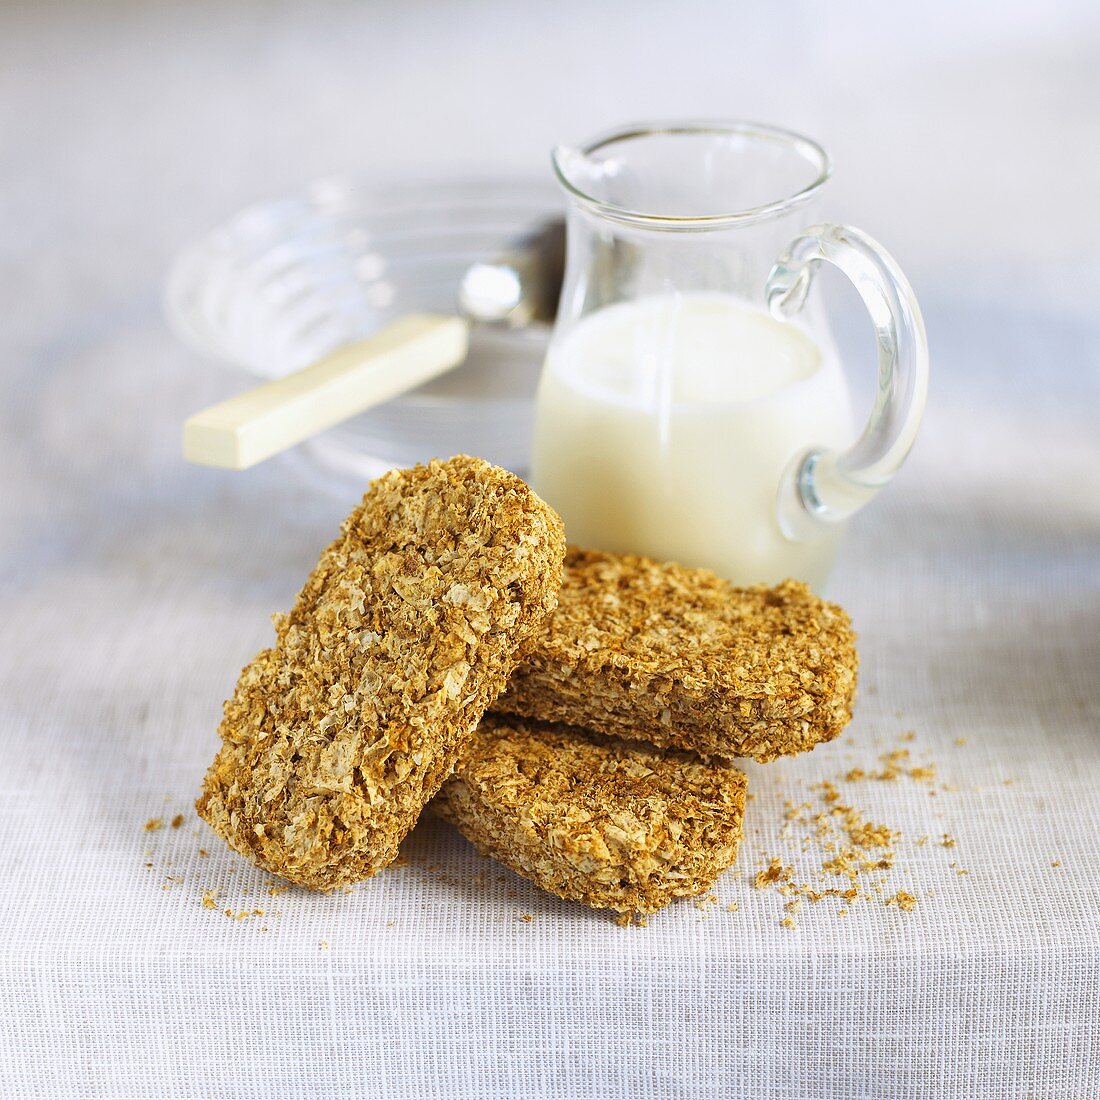 Three wheat biscuits (Weetabix) in front of a carafe of milk